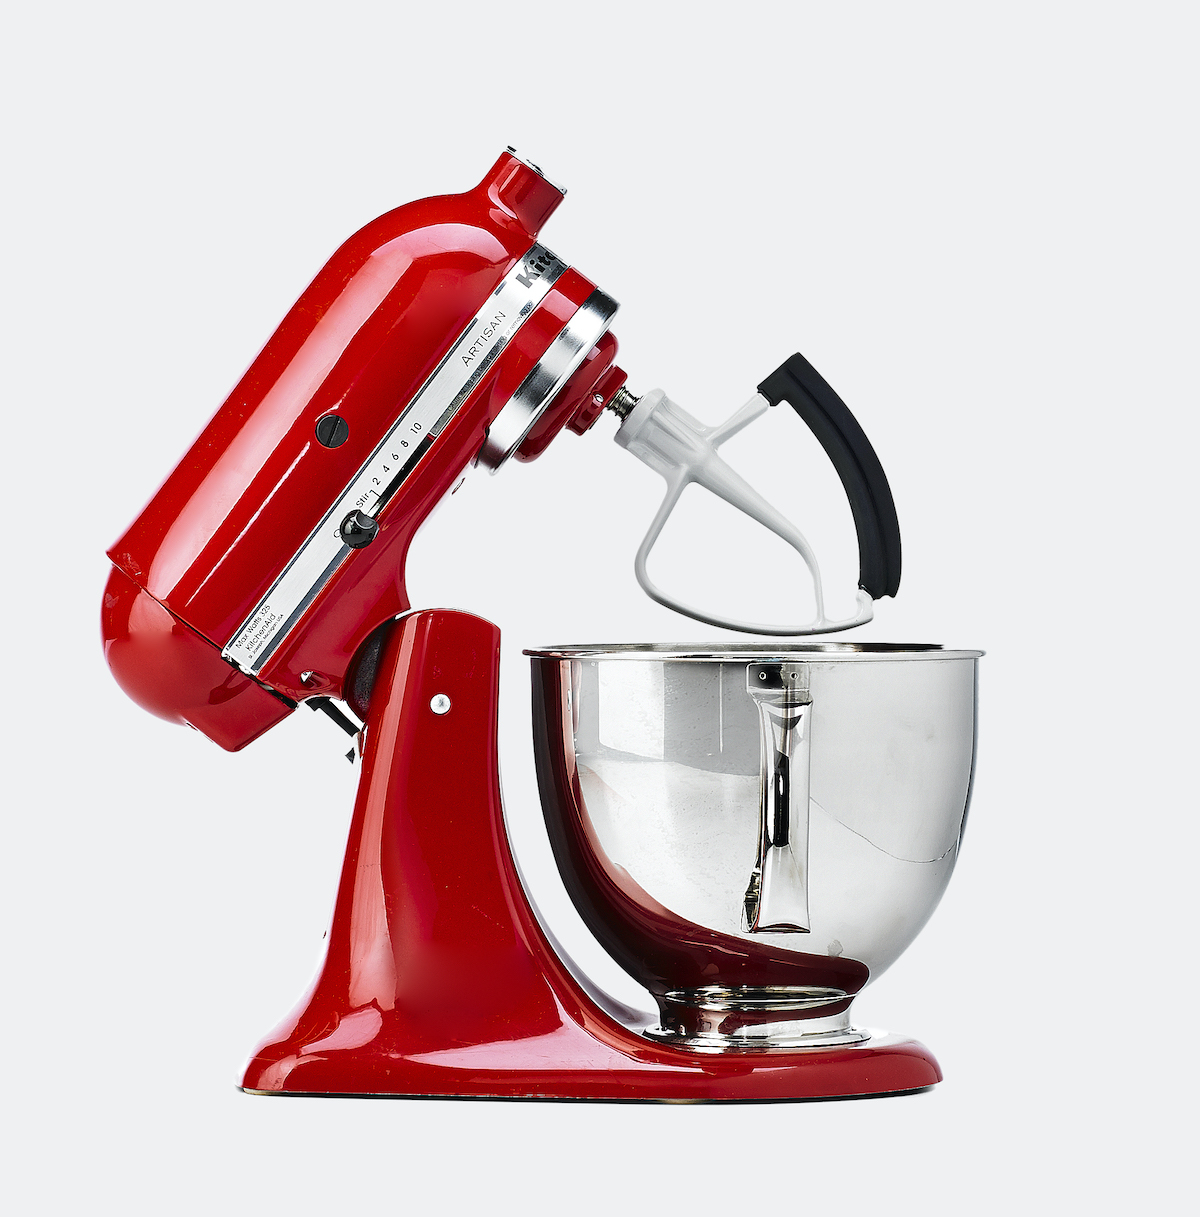 Kitchen Aid registry items deal on black Friday